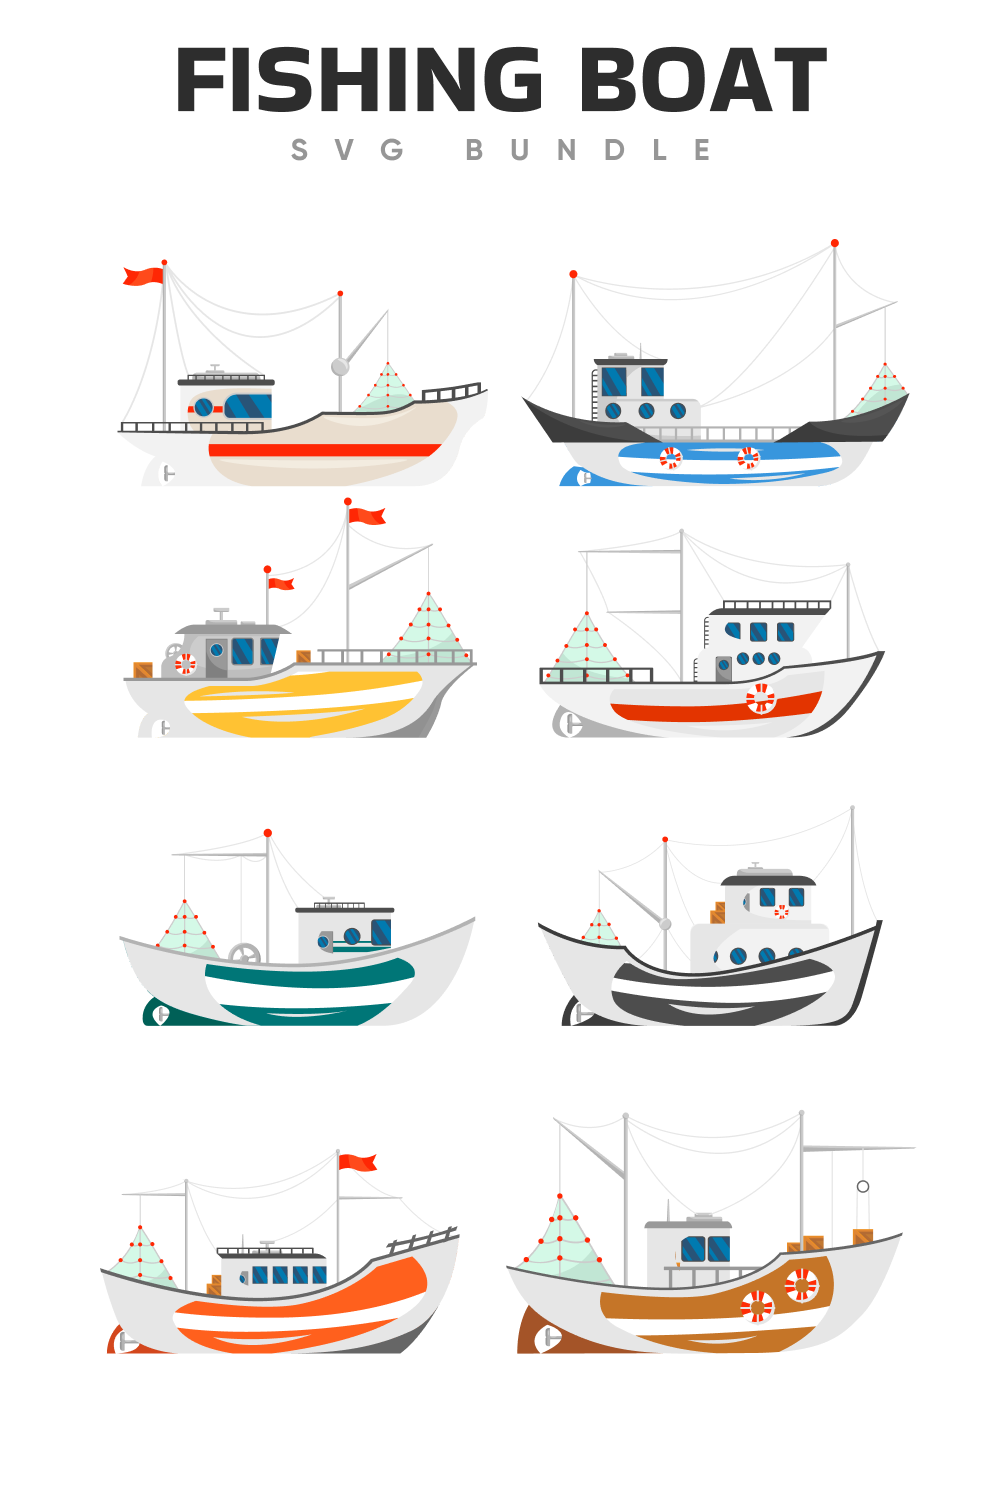 Diverse of luxury boats for fishing.